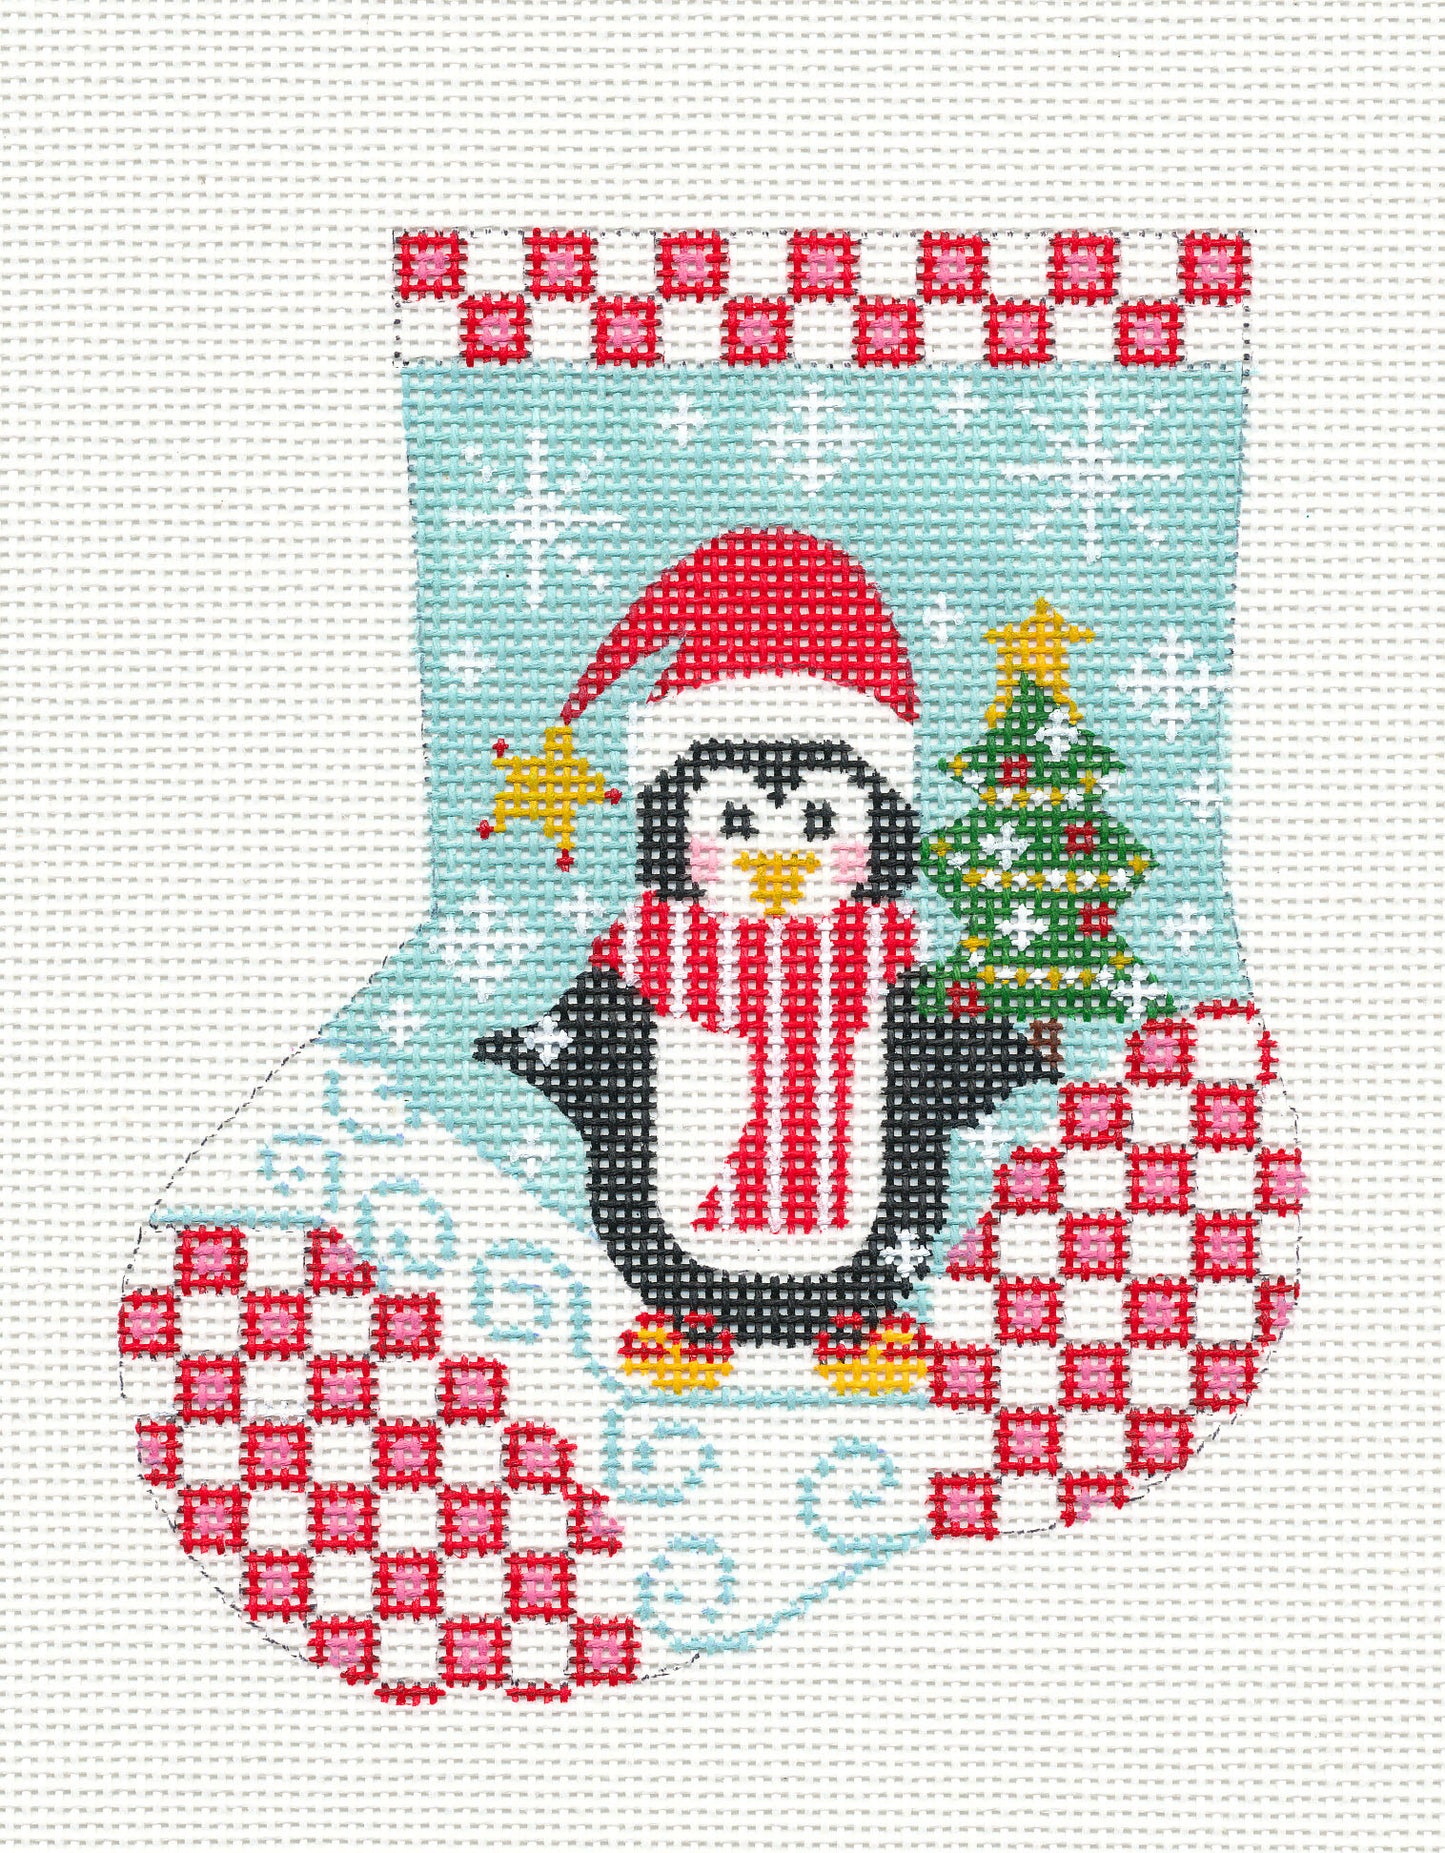 Mini Stocking ~ Penguin On Red & White Checked background Christmas Ornament on handpainted Needlepoint Canvas by CH Designs from Danji